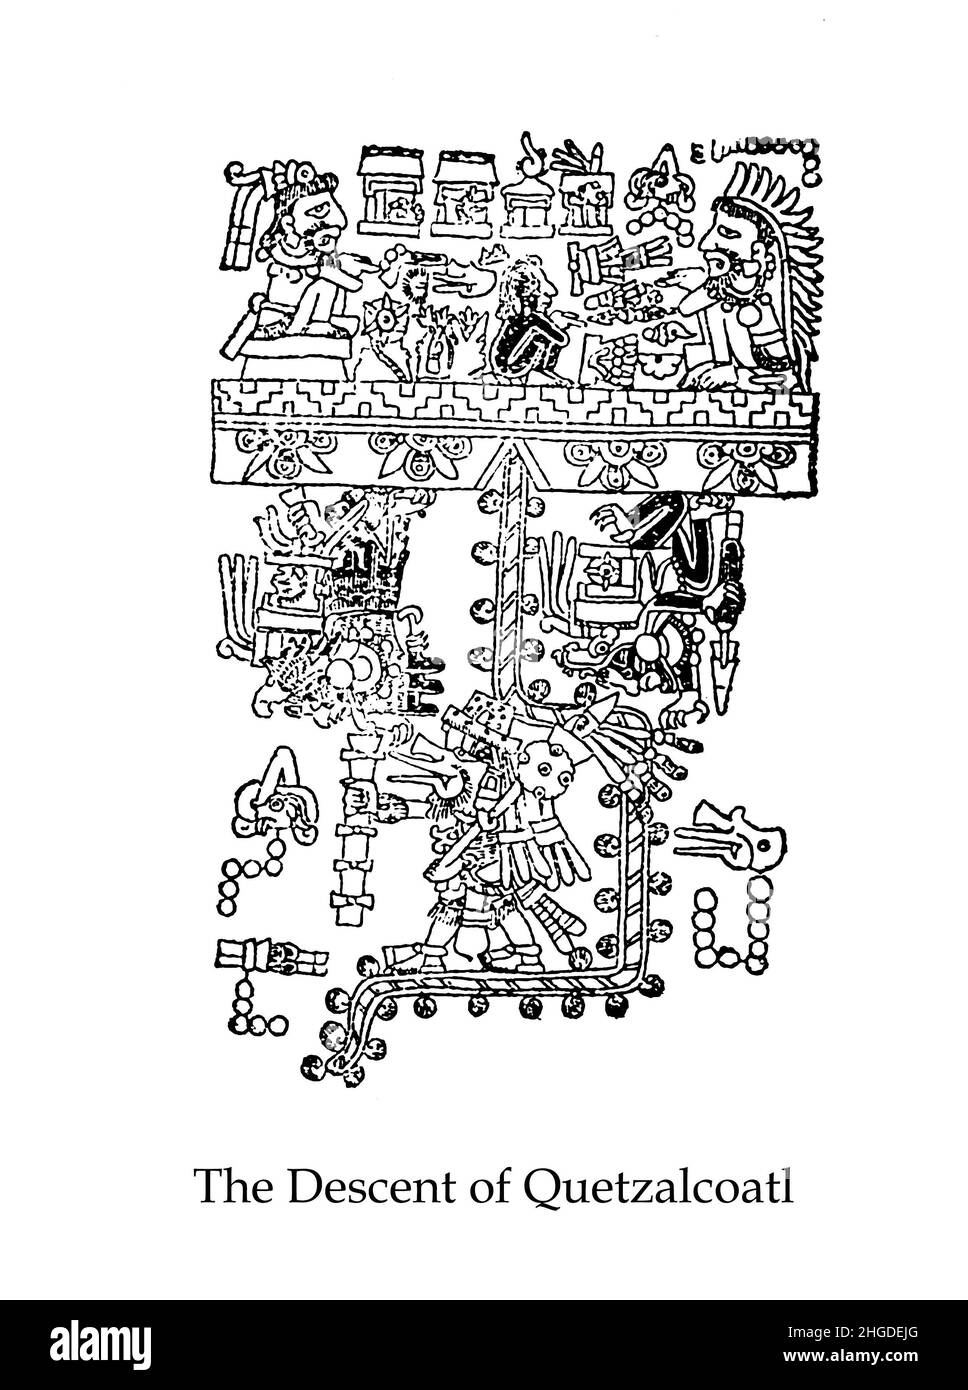 THE DESCENT OF QUETZALCOATL (is a deity in Aztec culture and literature whose name comes from the Nahuatl language and means 'Precious serpent' or 'Quetzal-feathered Serpent') from the book ' Myths and Legends Mexico and Peru ' by Lewis Spence, Publisher Boston : David D. Nickerson 1915 Stock Photo